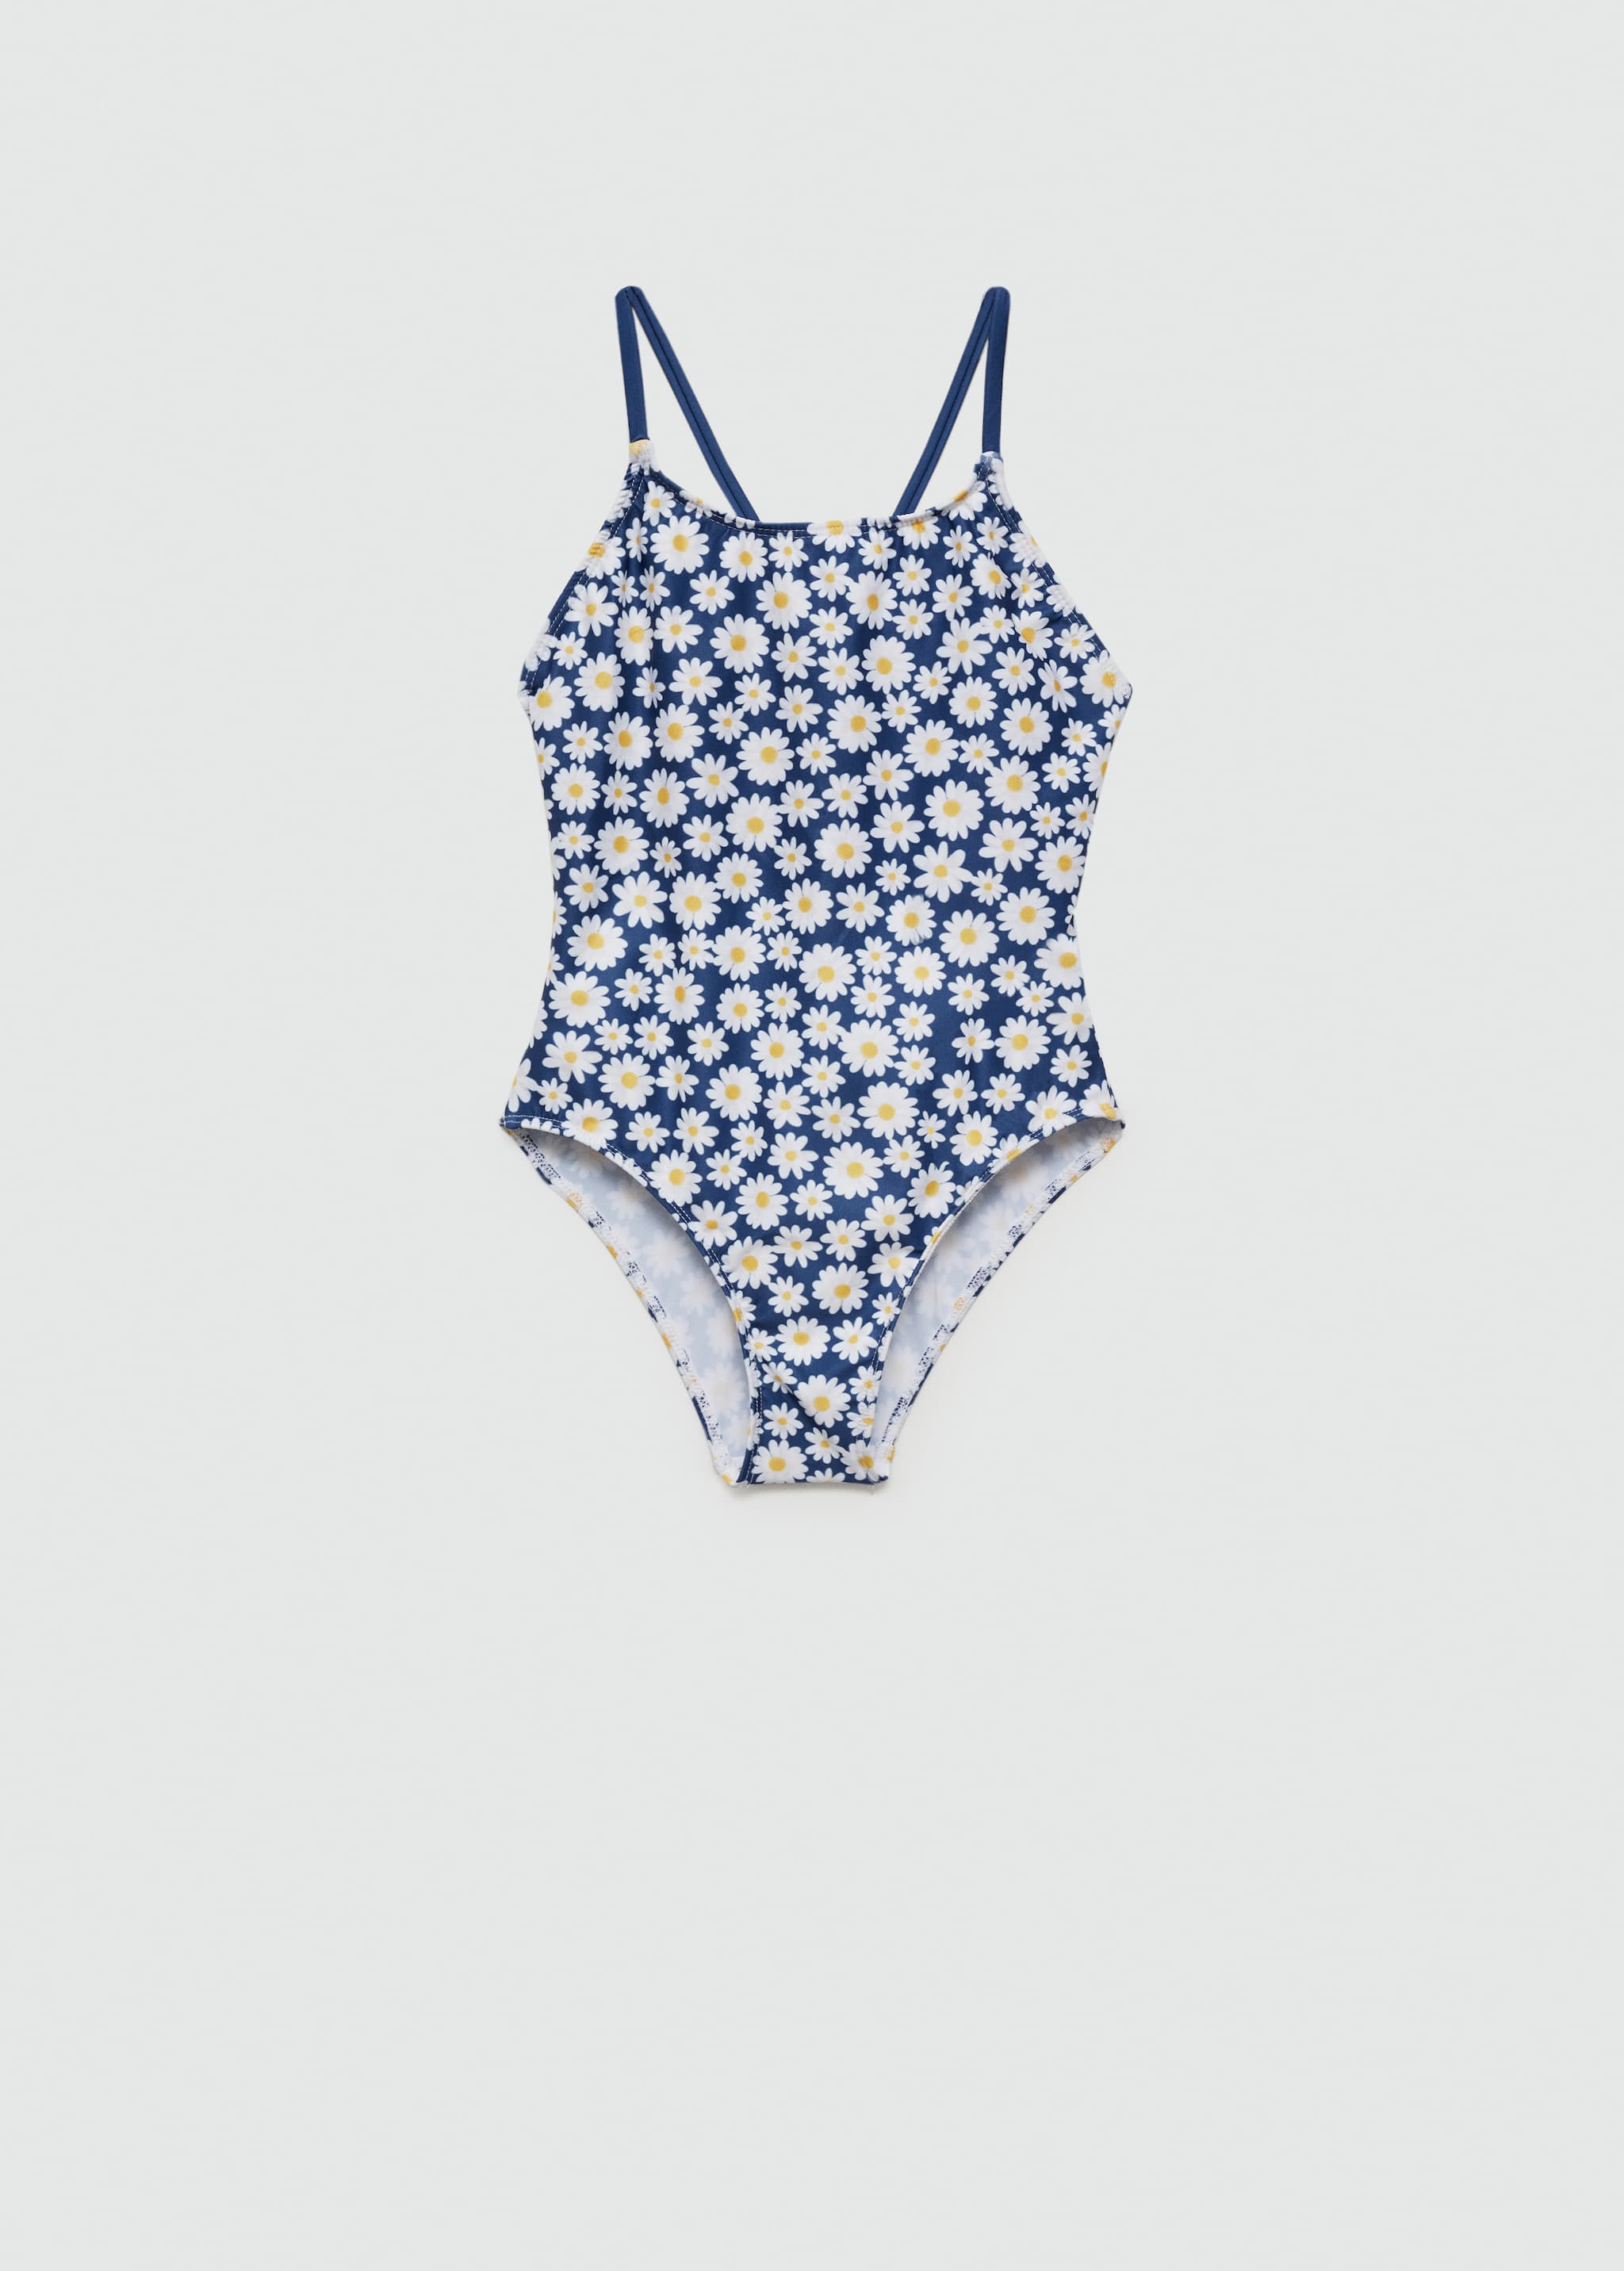 Daisy print swimsuit - Article without model